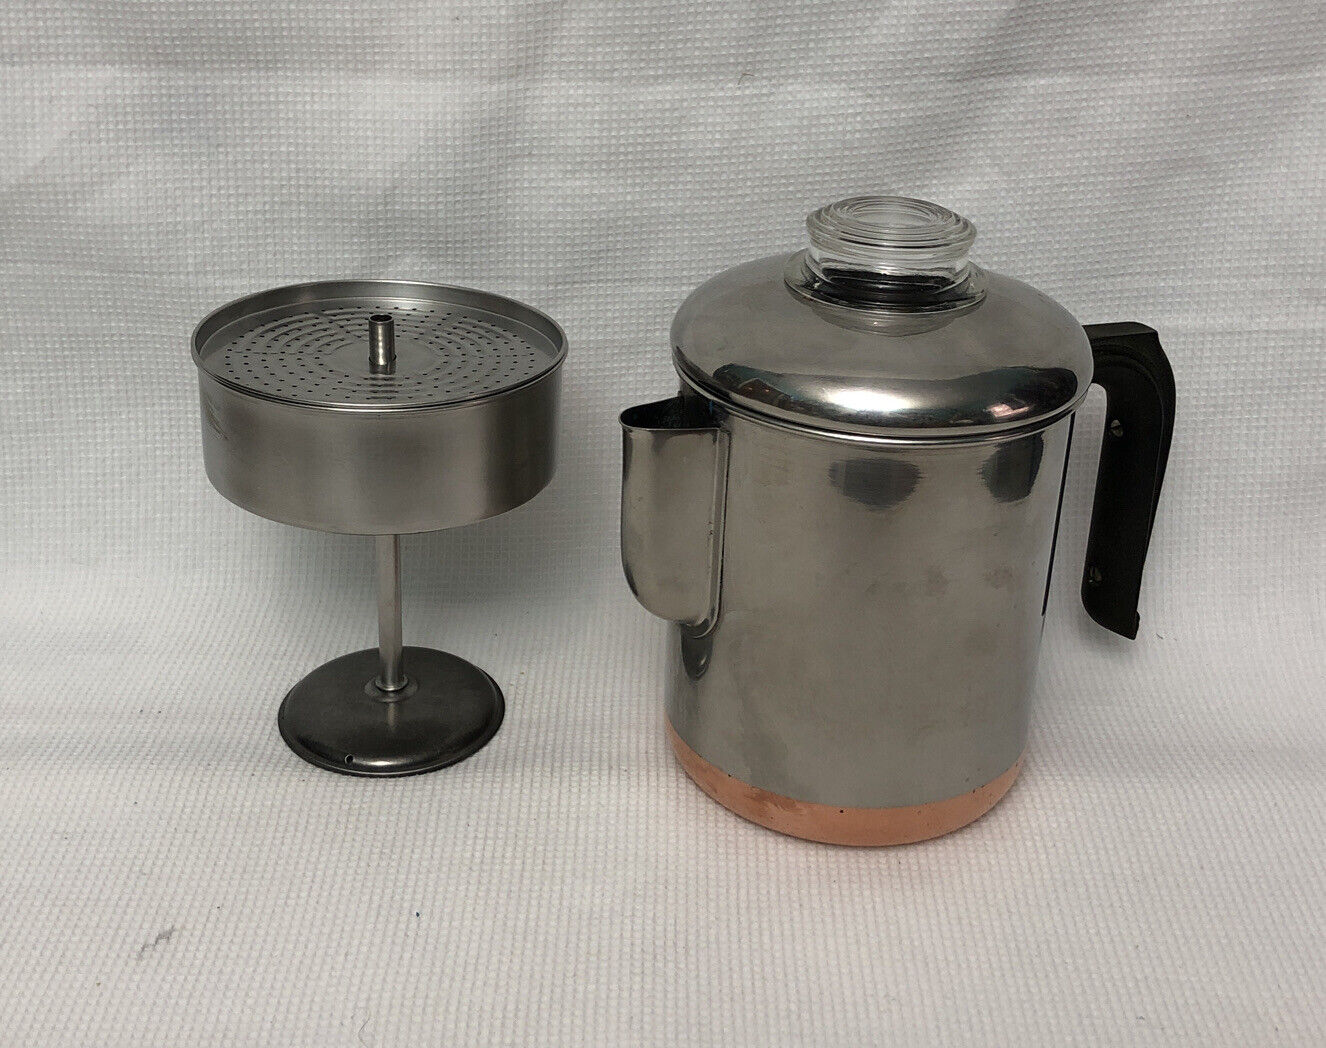 Vtg REVERE WARE PERCOLATOR/COFFEE POT 1801 Double Ring Copper Clad Stainless MCM